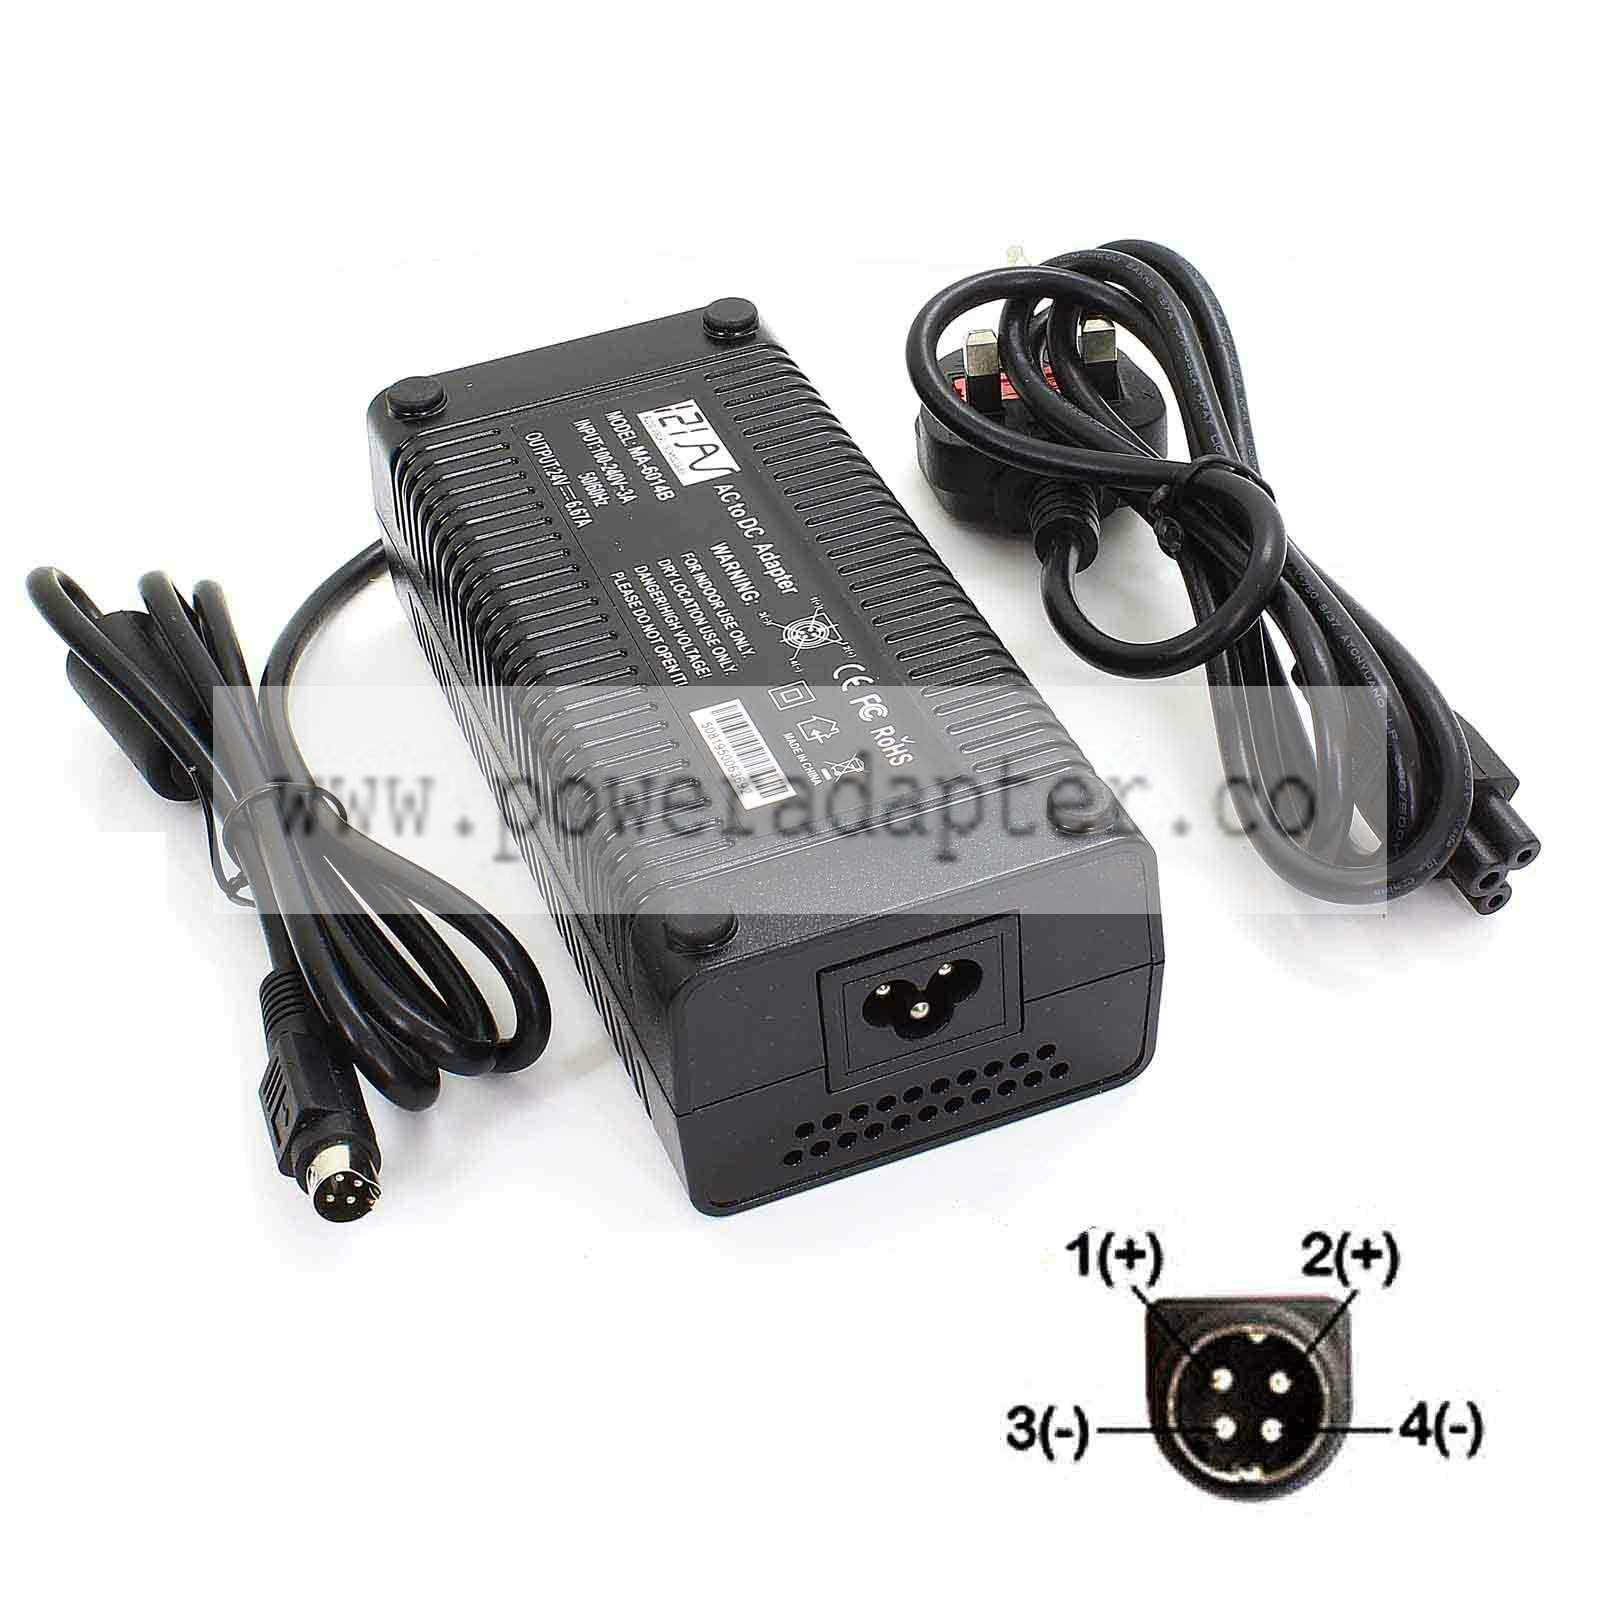 Power Supply and AC Adapter for GOODMANS LD2050FVT LCD / LED TV Brand: 121AV Type: AC/DC Power Adapter MPN: Does no - Click Image to Close